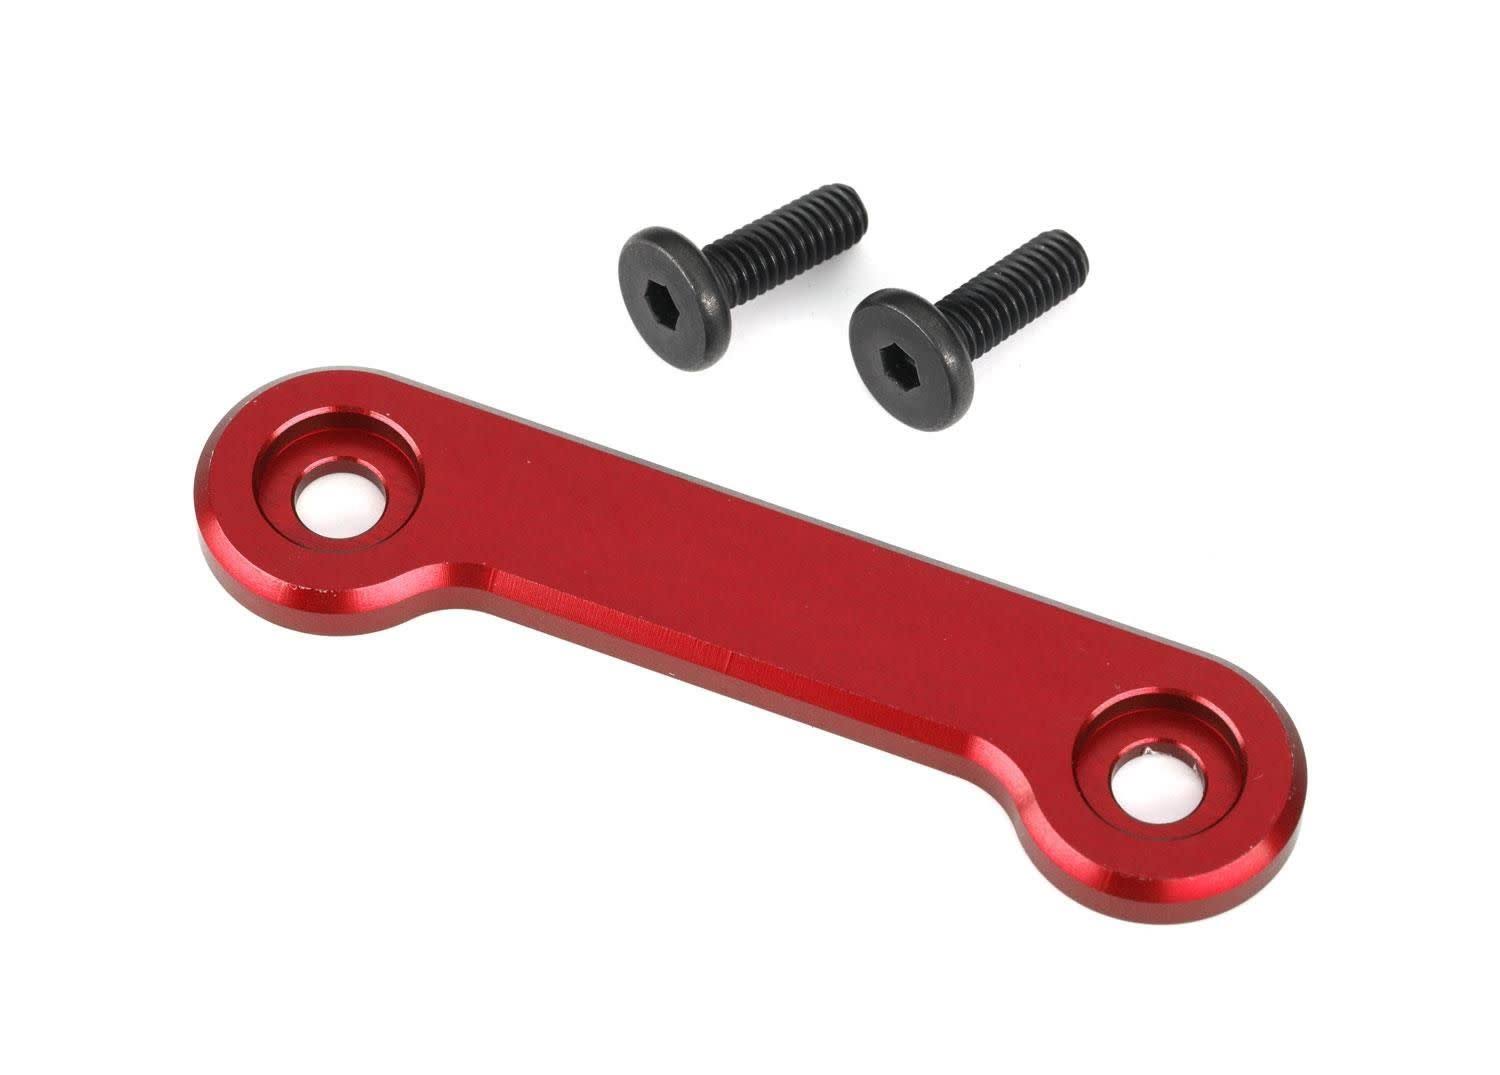 Traxxas 9617R Wing Washer, 6061-T6 Aluminum (red-anodized) (1)/ 4x12mm FCS (2)